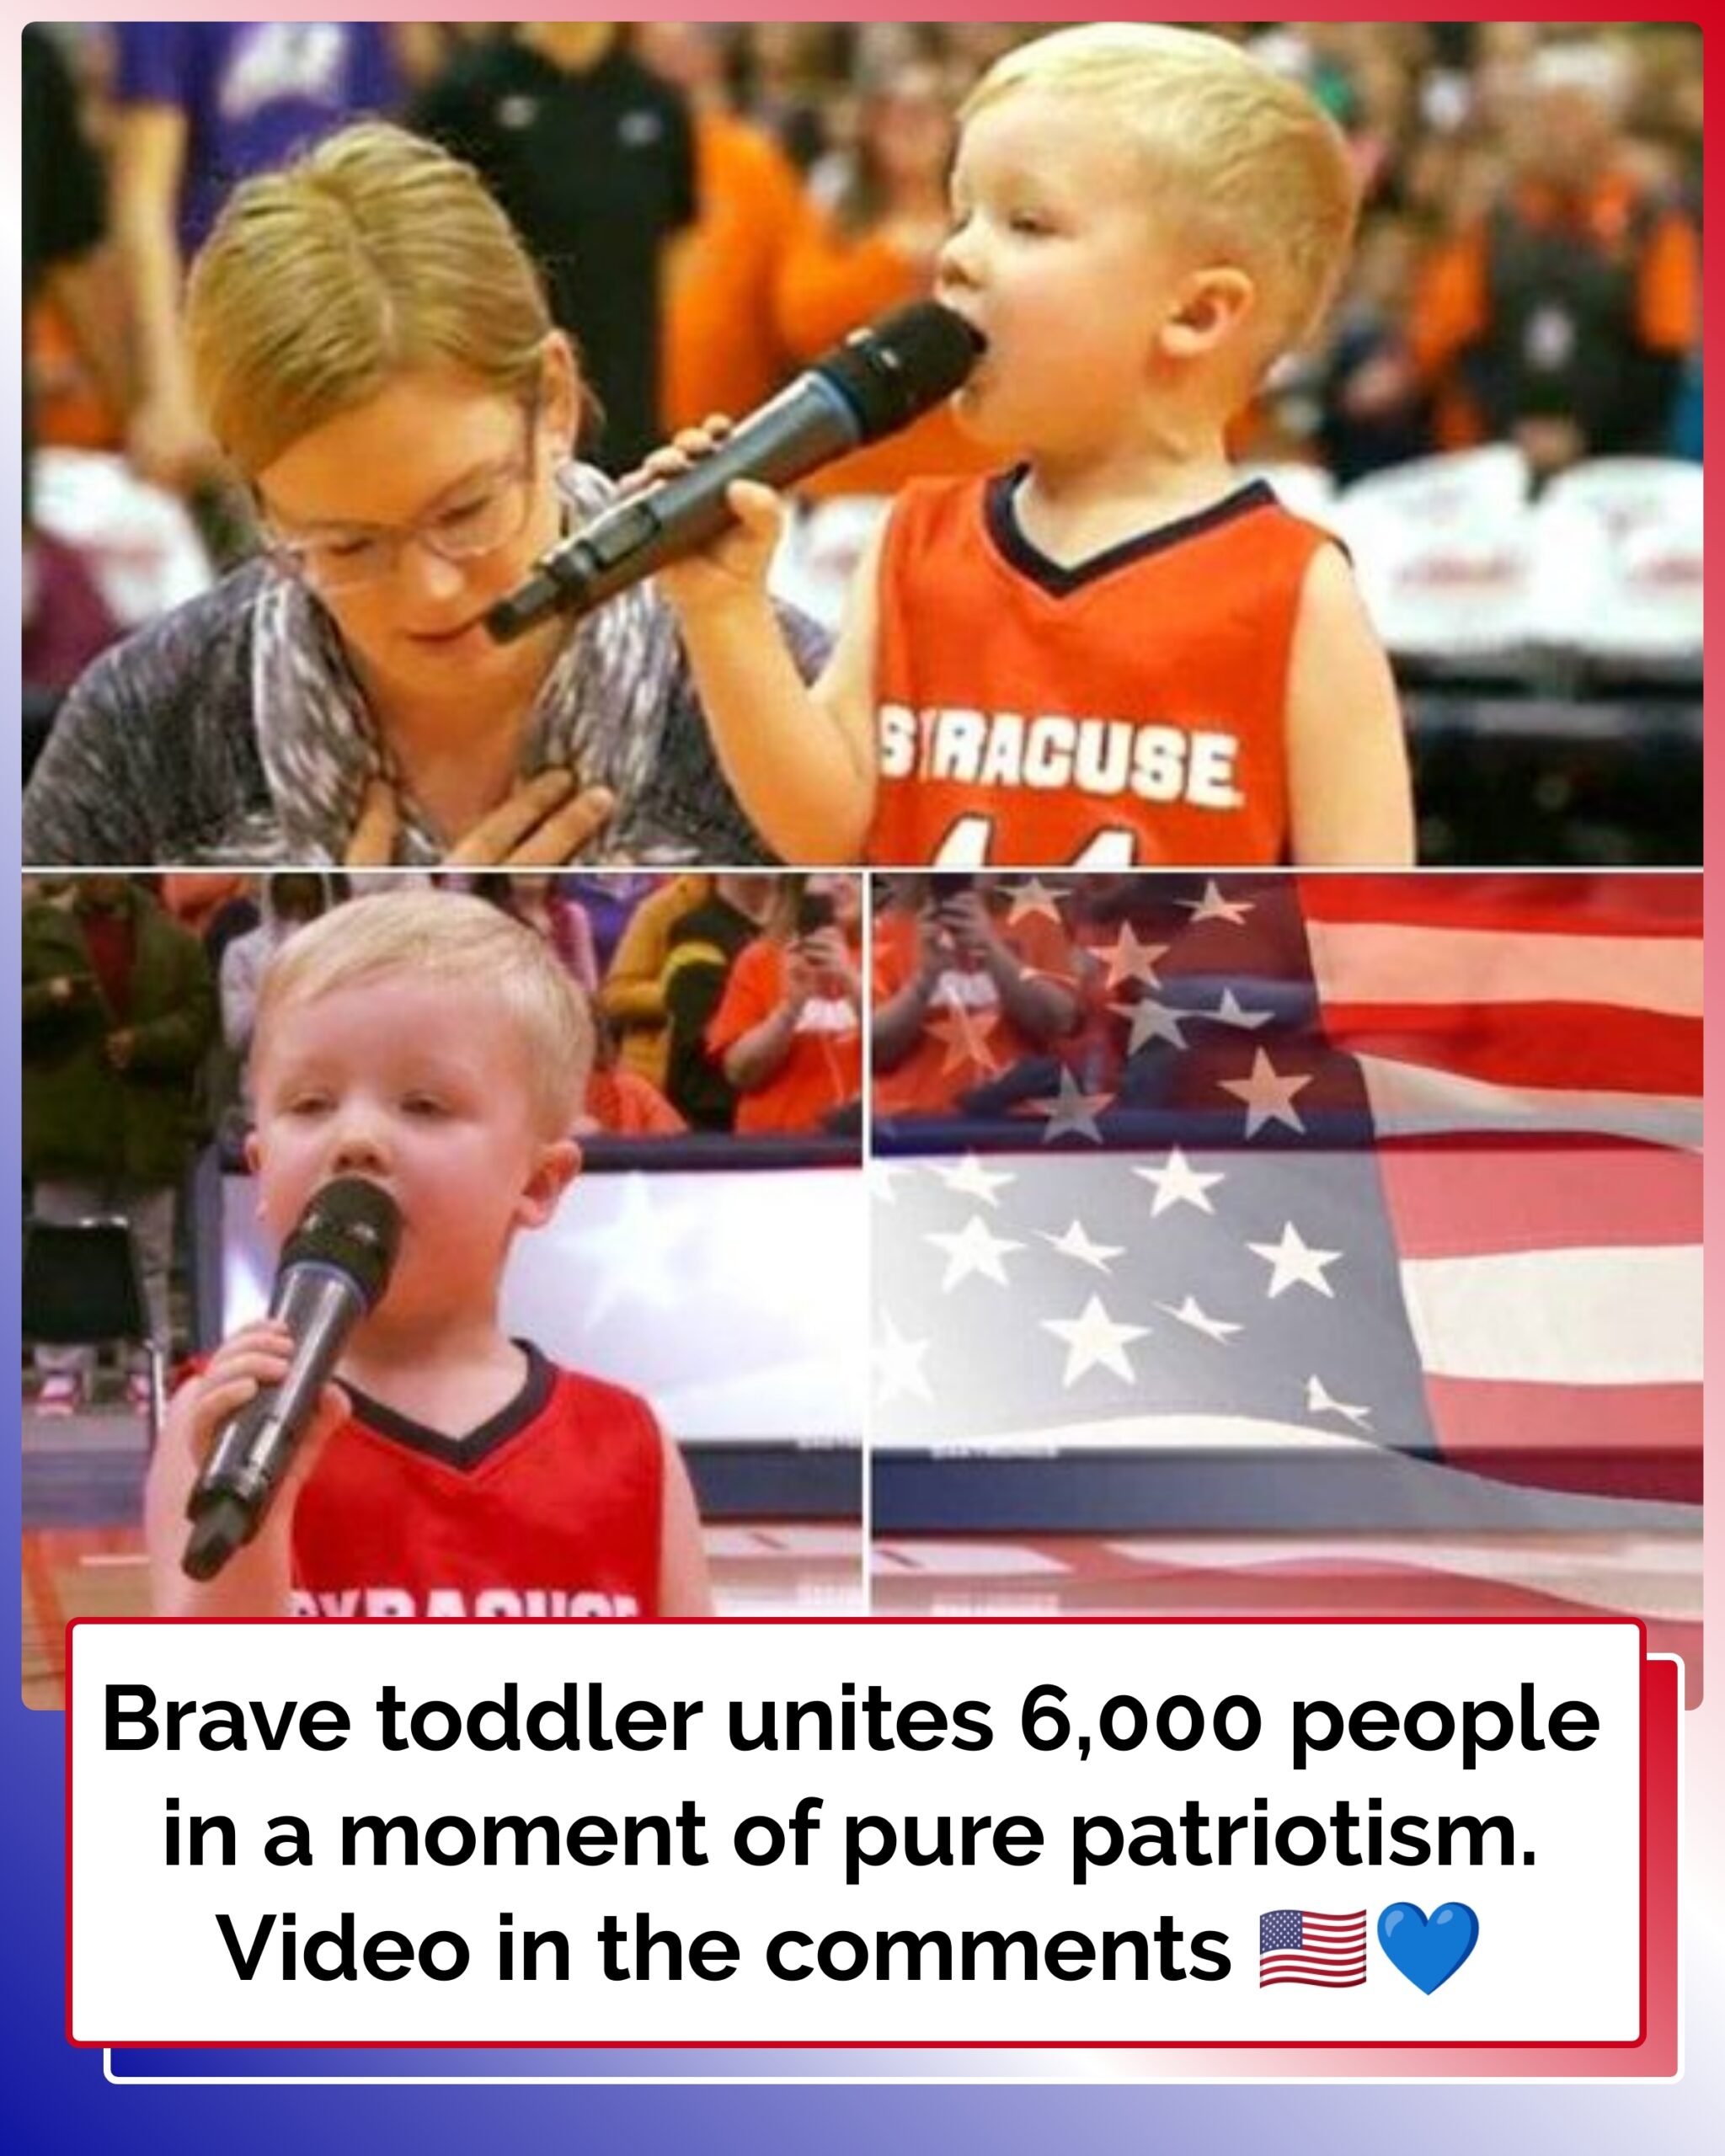 Brave Toddler Agrees to Sing National Anthem Before Crowd, Only to Have 6,000 People on Their Feet